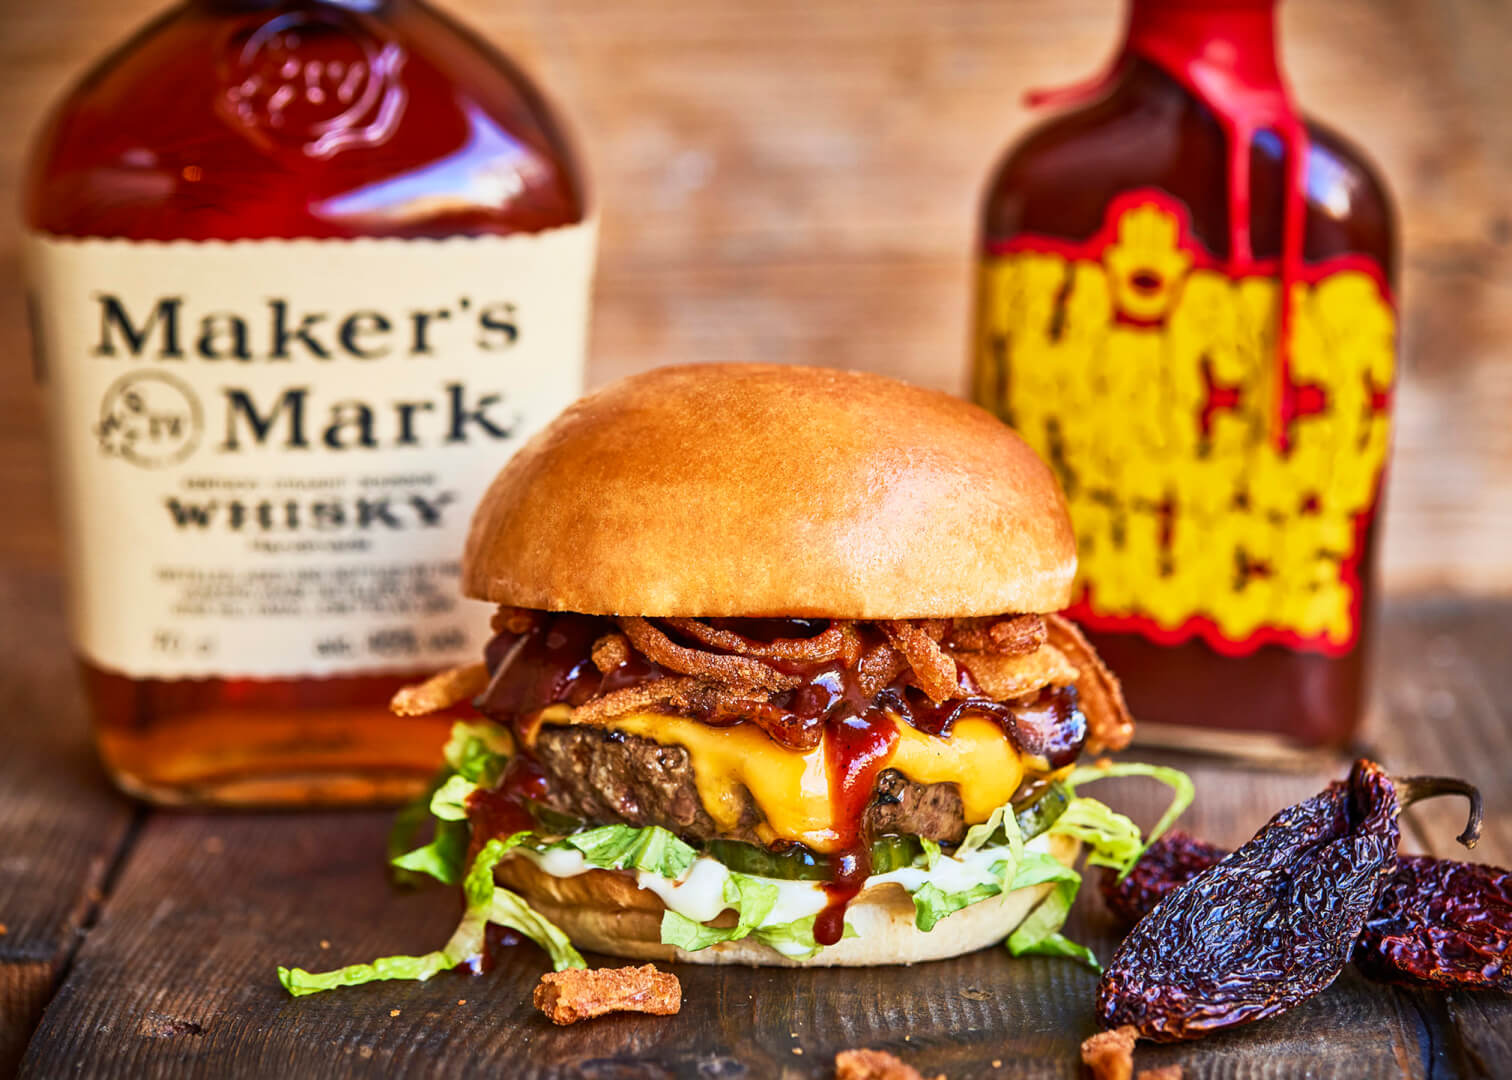 A burger featuring Bourbon BBQ Sriracha sauce from Thiccc Sauce